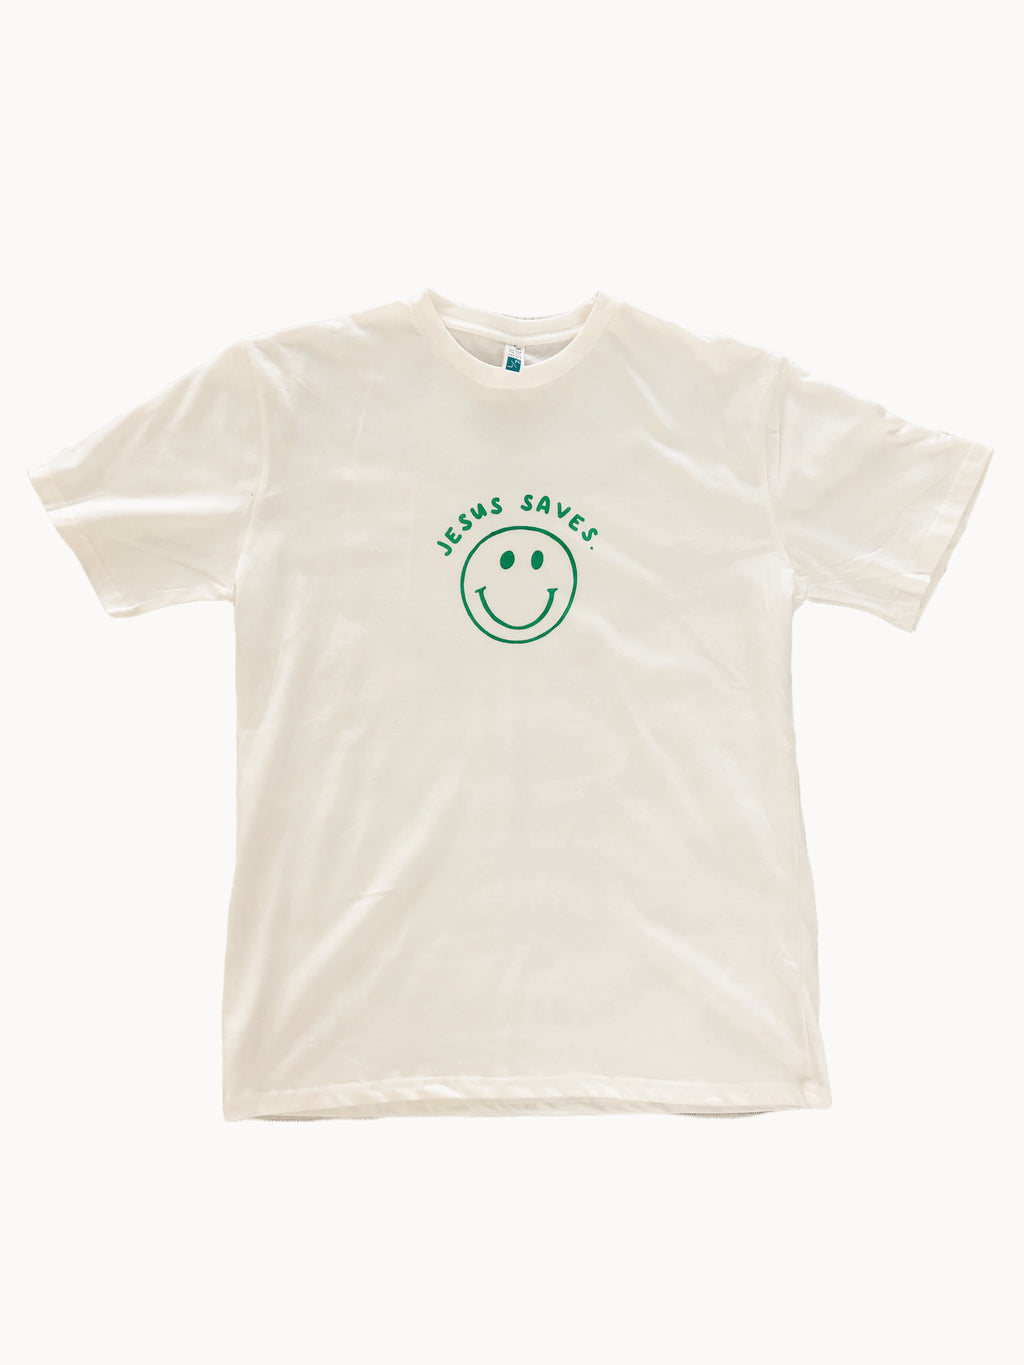 JESUS SAVES SMILEY FACE OFF-WHITE SLEEVE T-SHIRT